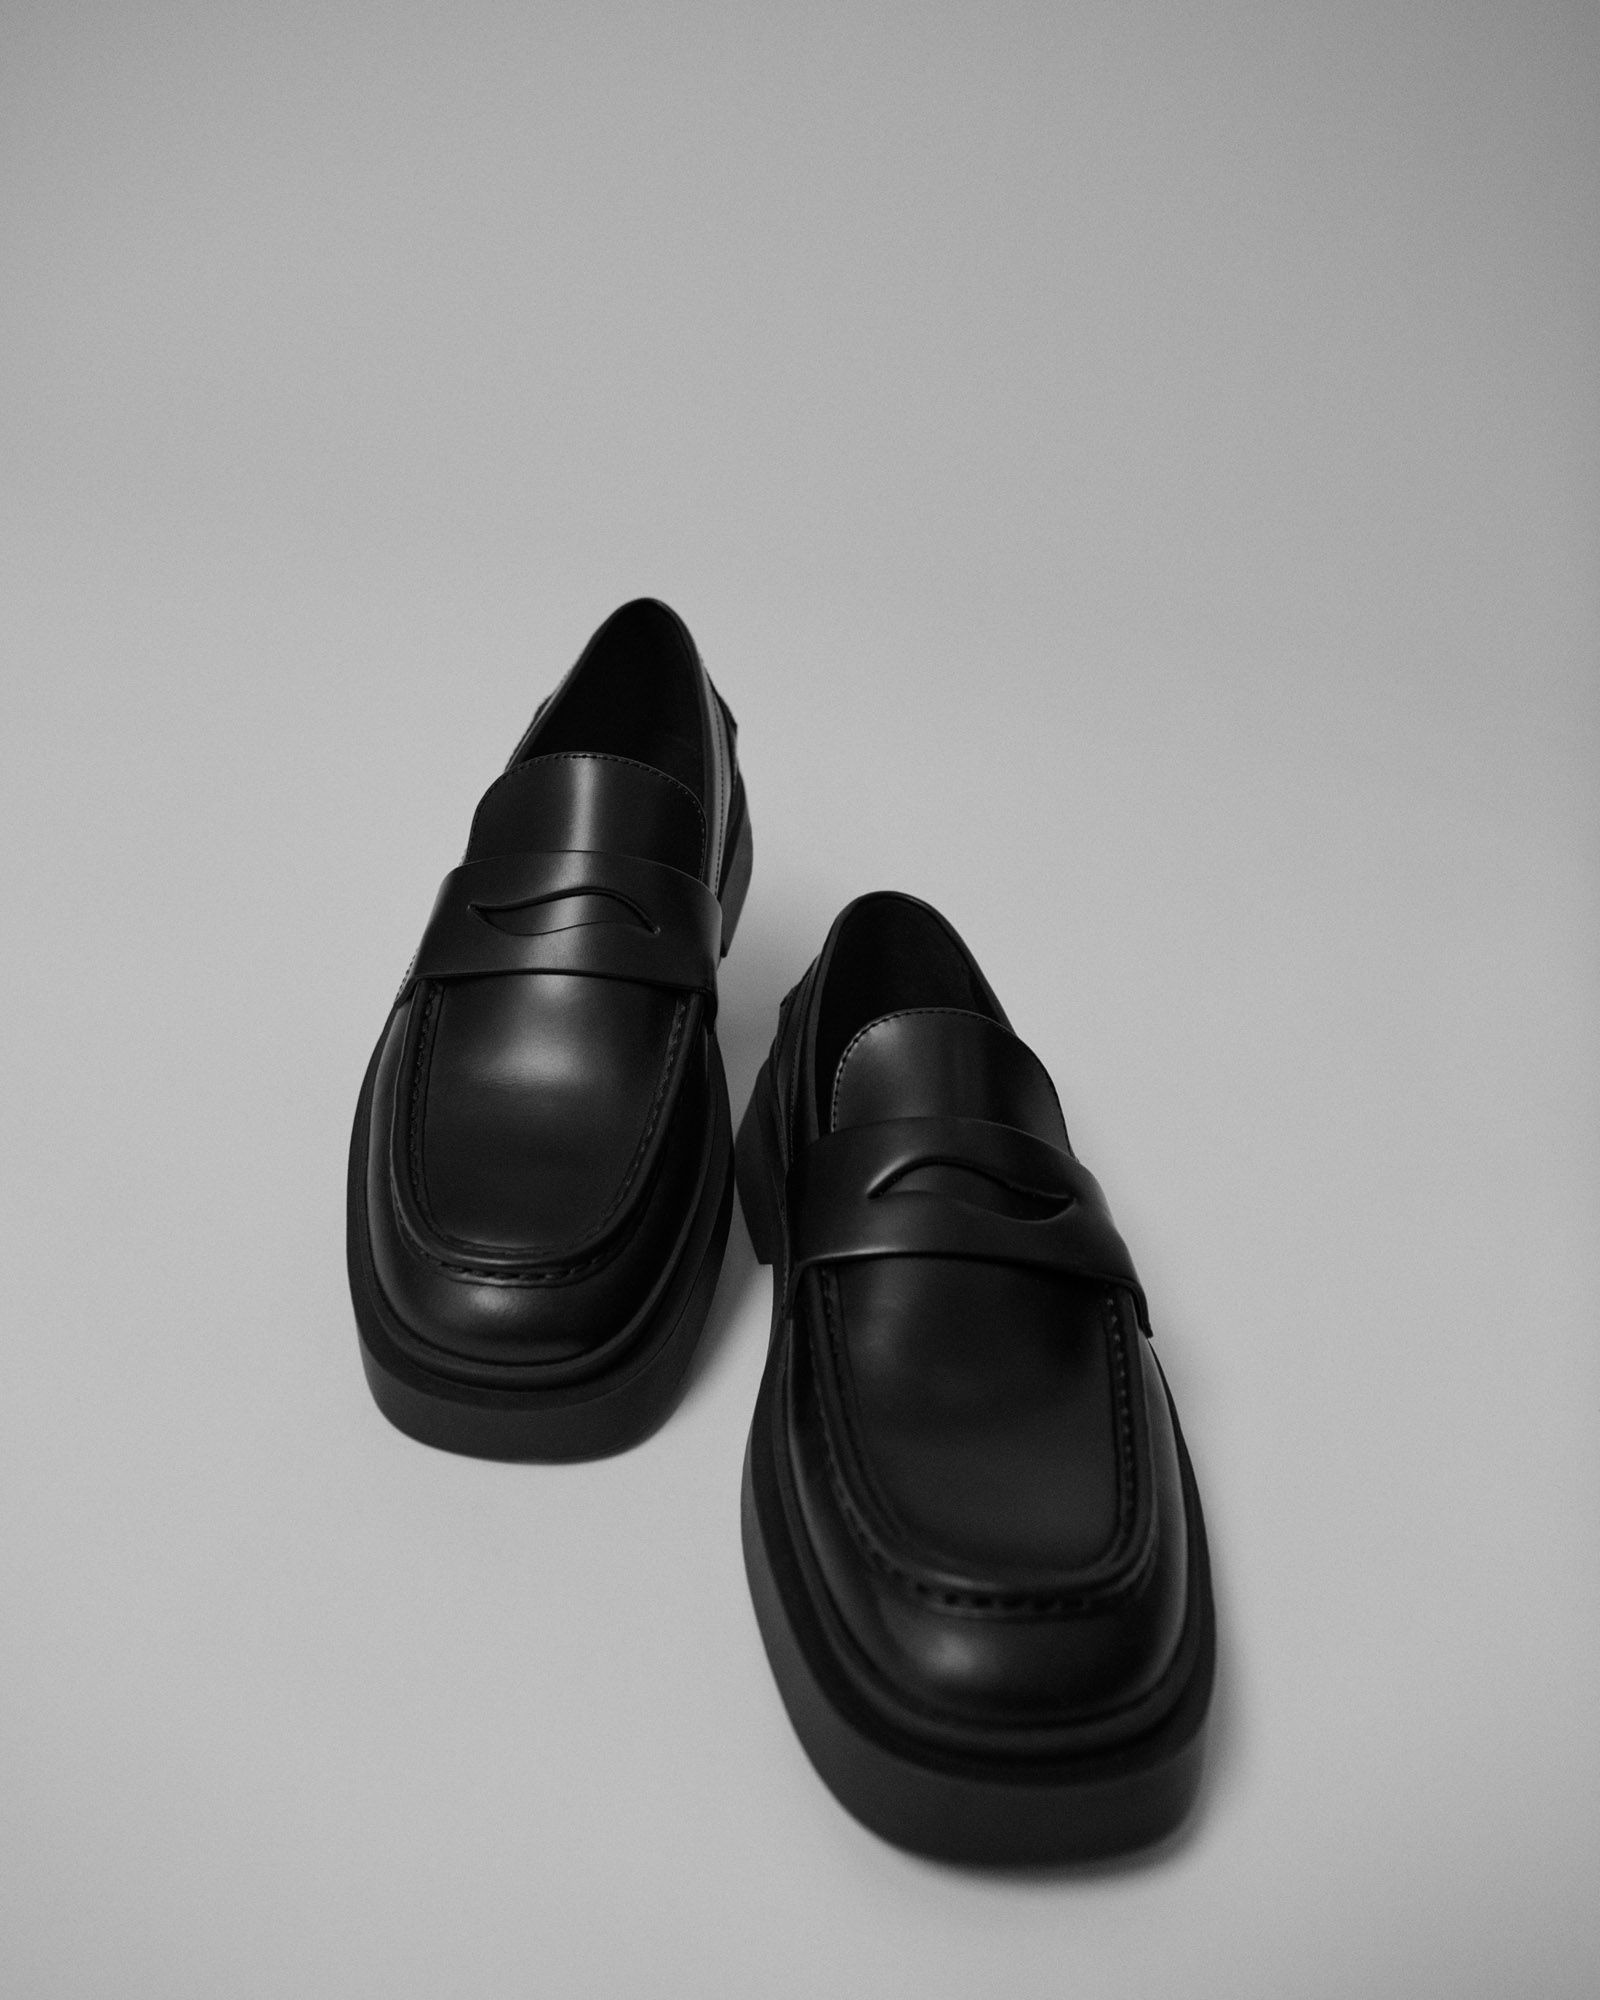 vagabond-shoemakers-fall-winter-21-buy-now-05